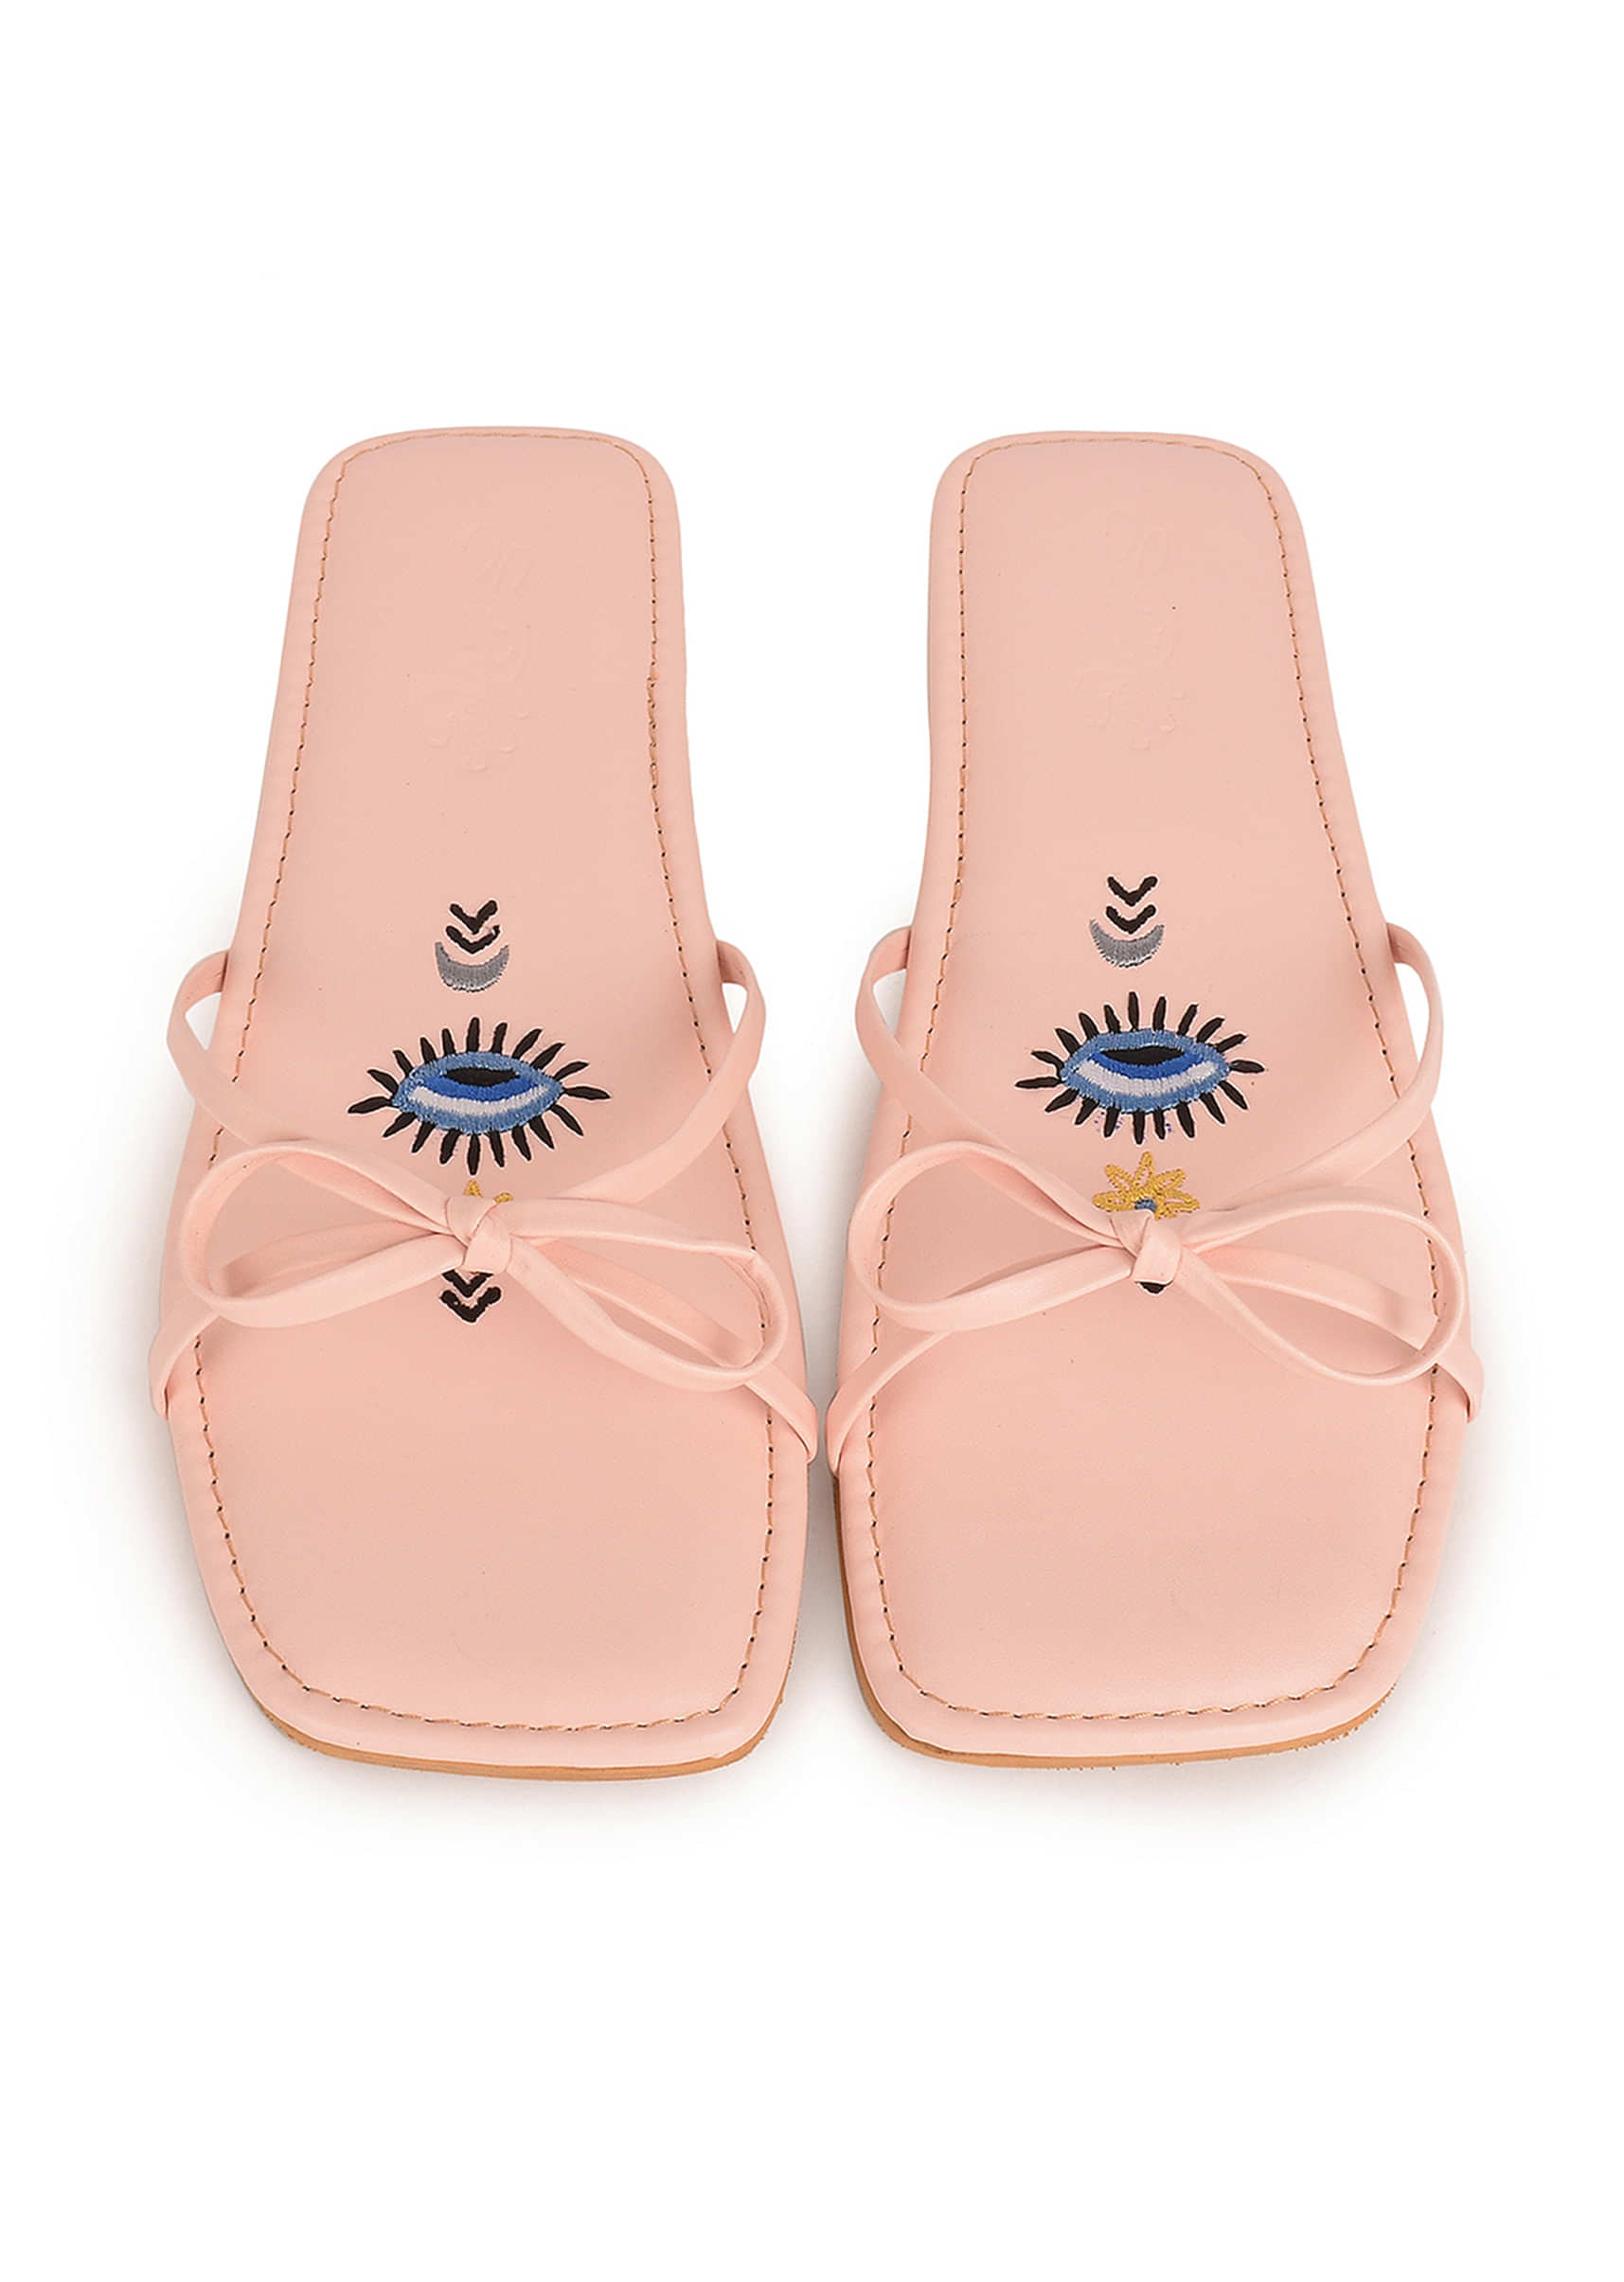 Pastel Pink Flats With Bow Detailing And Evil Eye Motif By Sole House